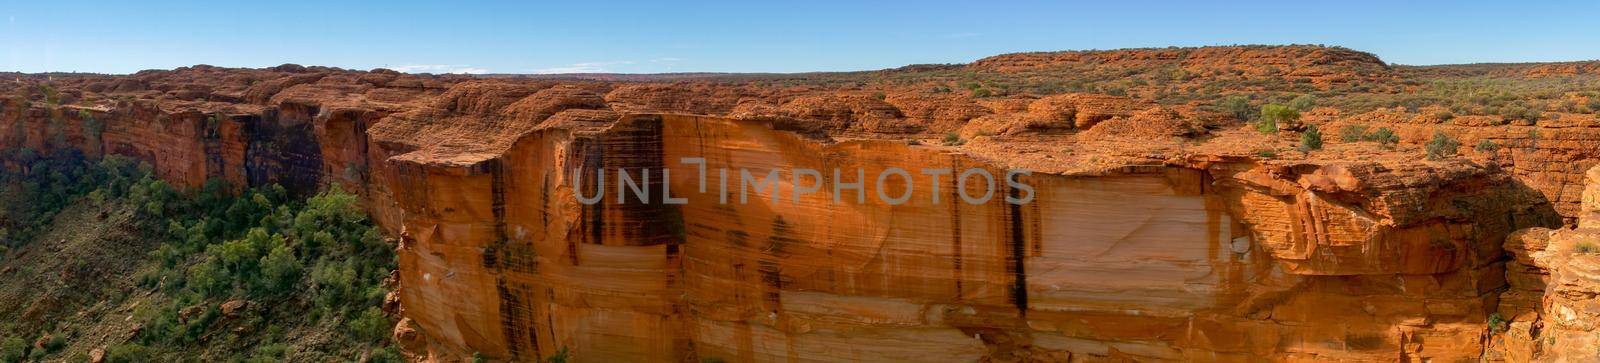 view of the a Canyons wall, Watarrka National Park, Northern Territory, Australia by bettercallcurry